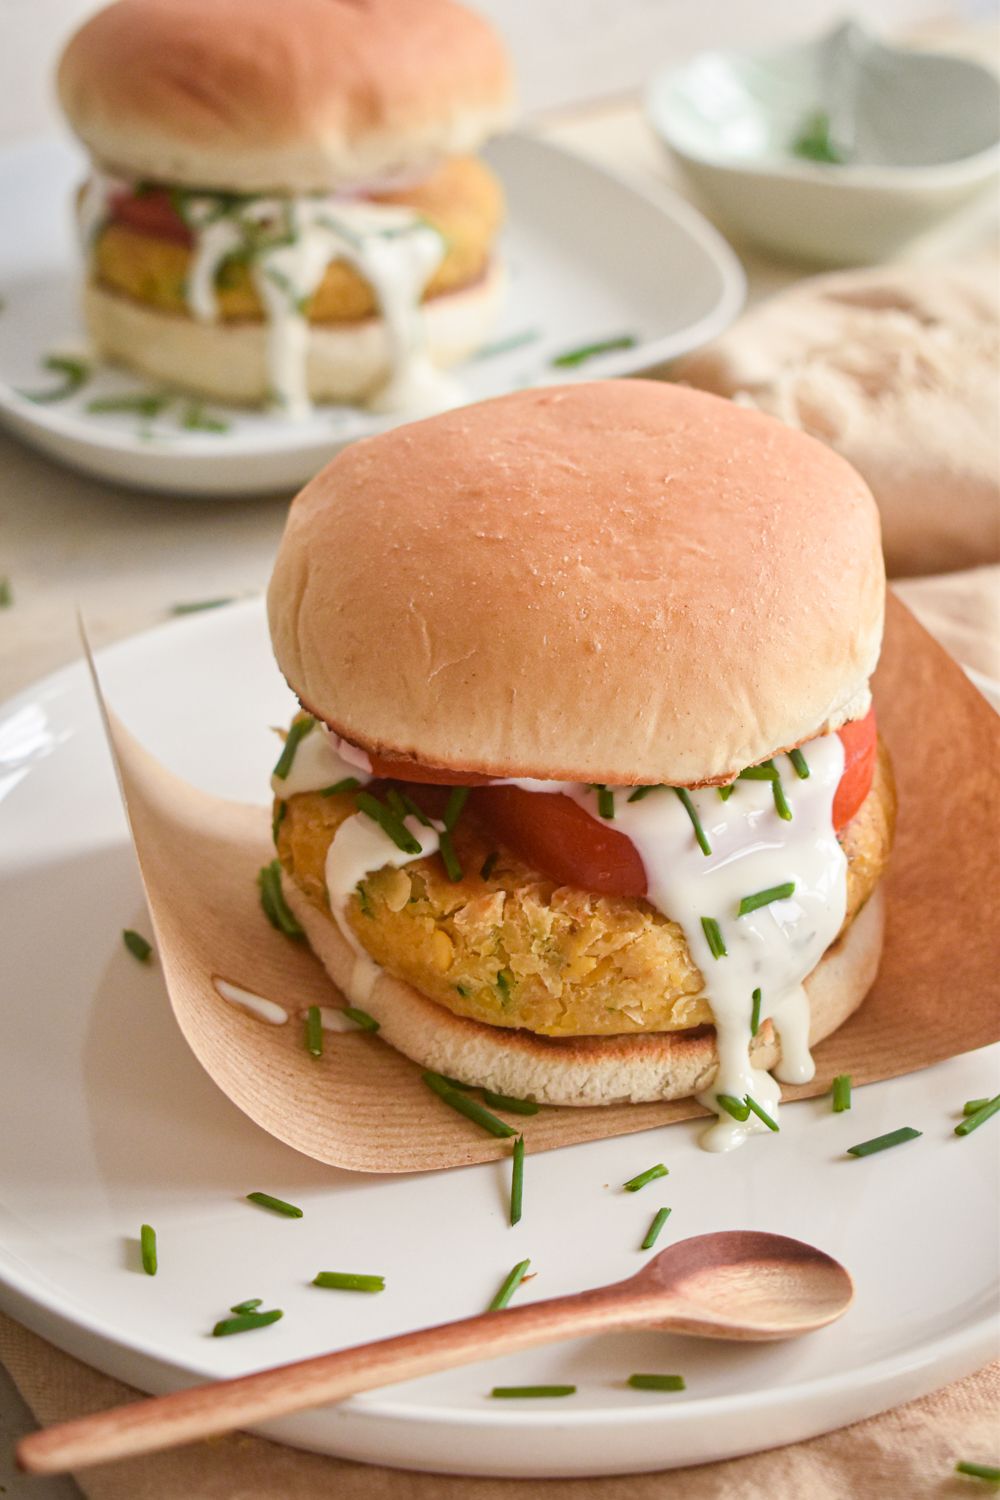 Chickpea burgers with ranch seasoning on a rolll with tomato and ranch dressing.